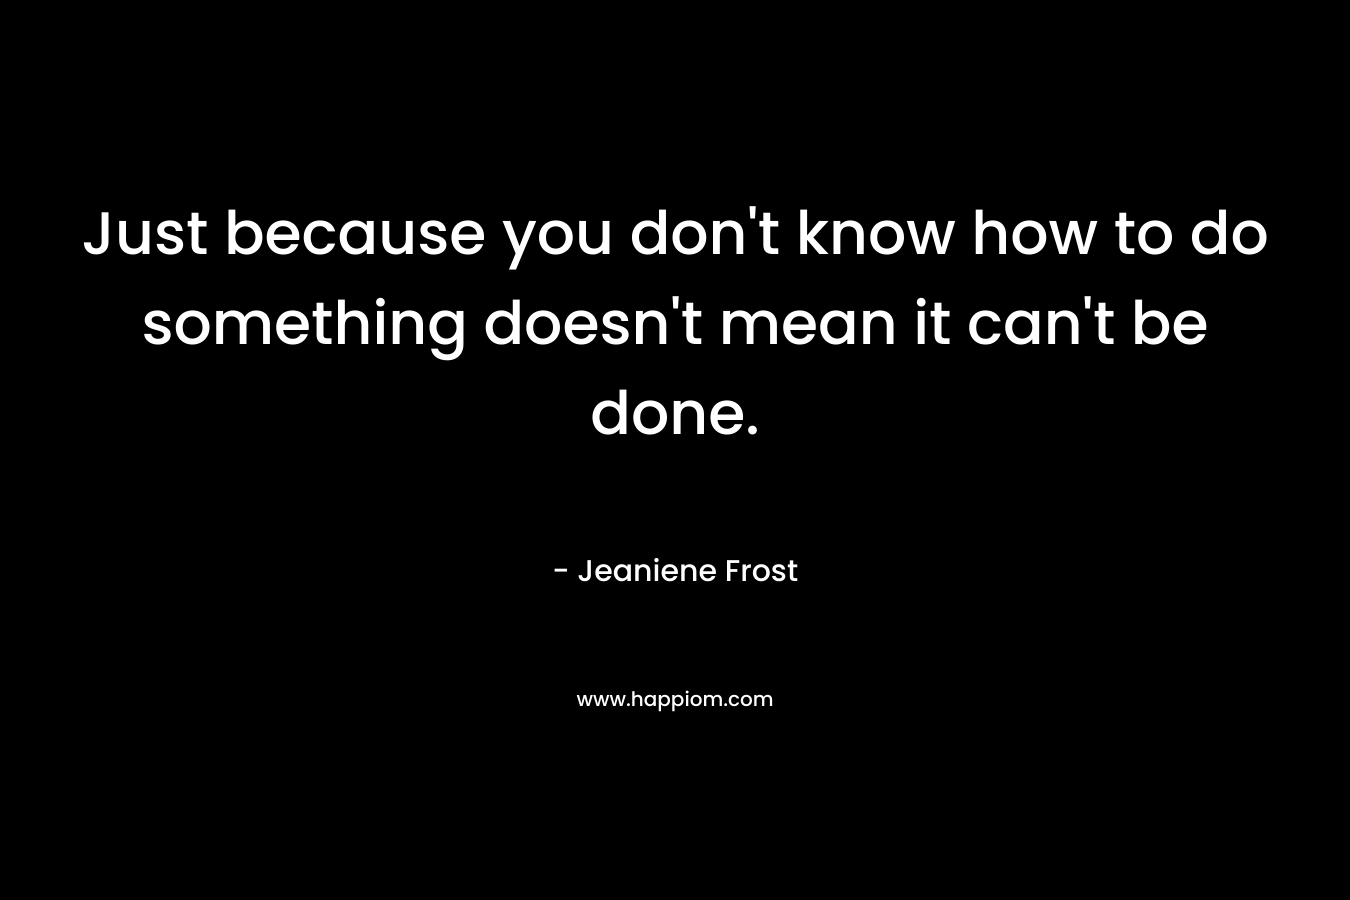 Just because you don't know how to do something doesn't mean it can't be done.